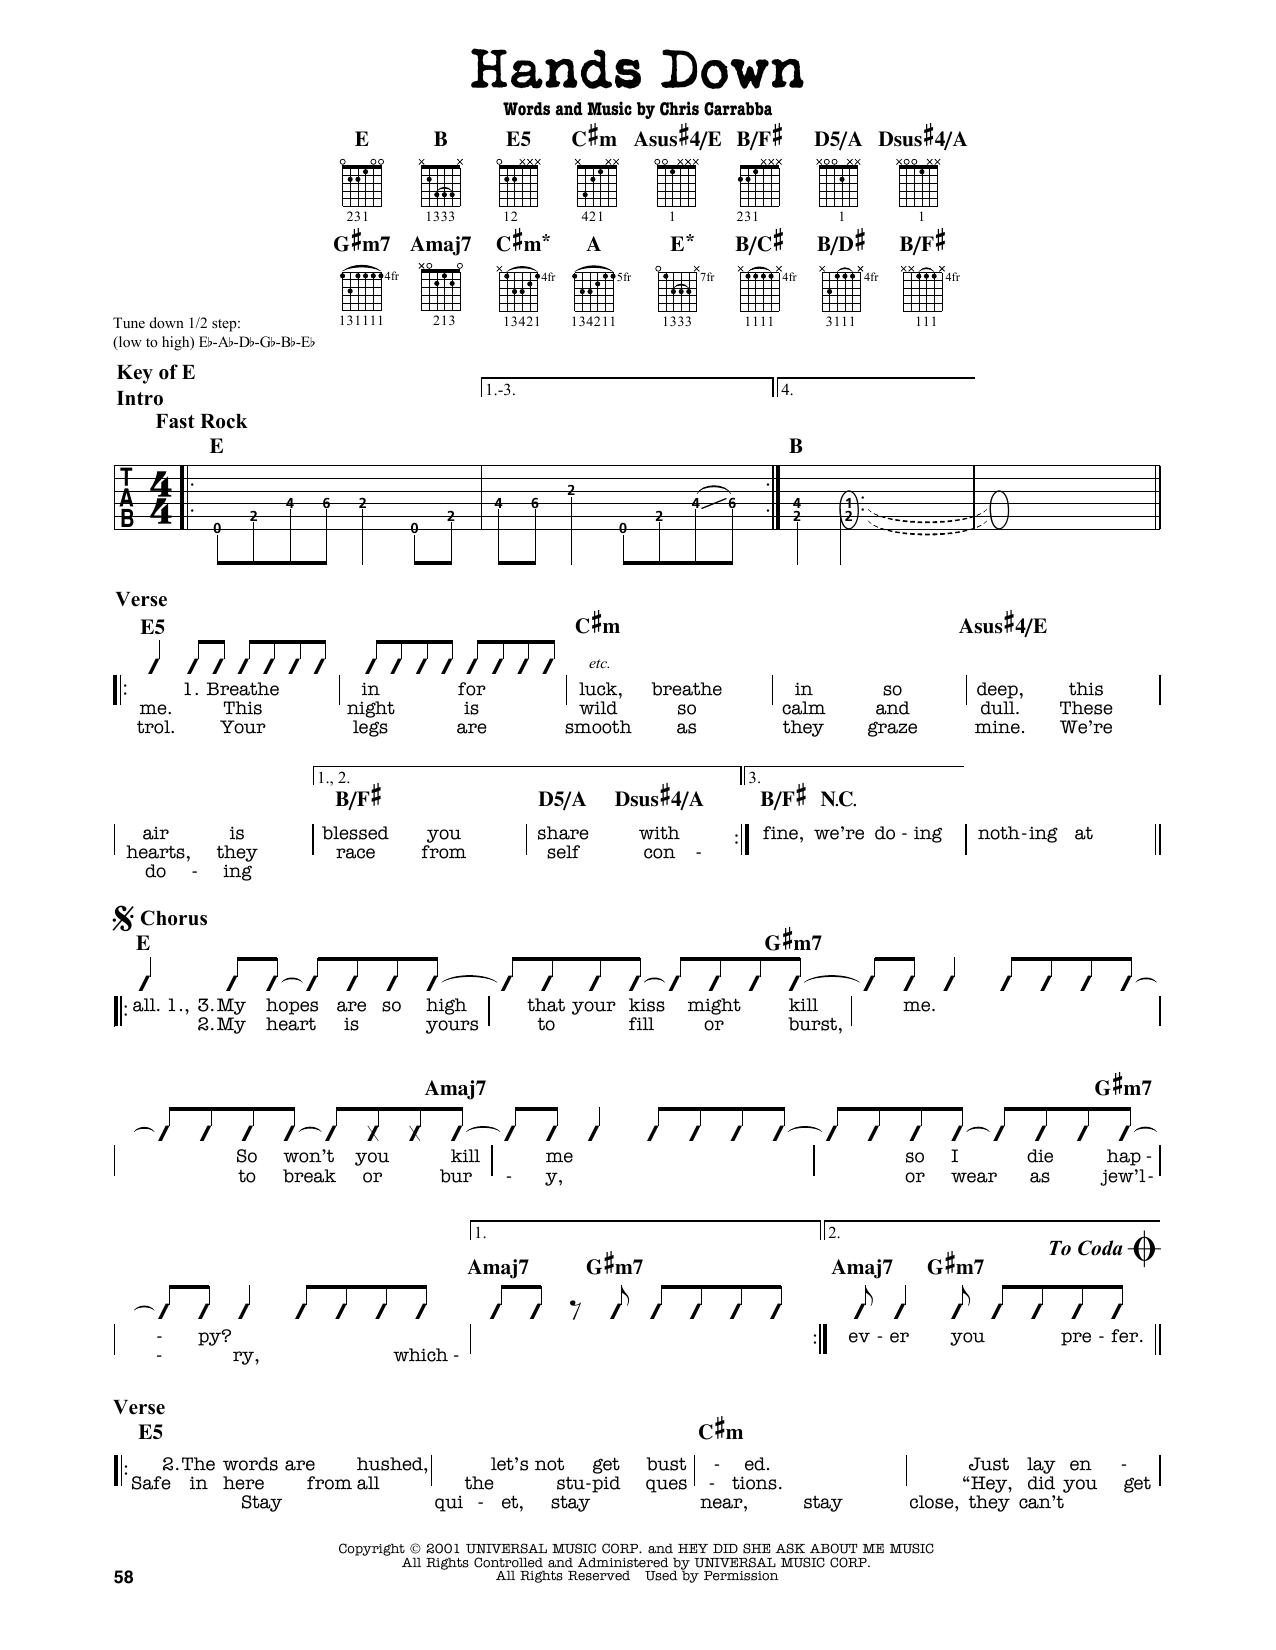 Download Dashboard Confessional Hands Down Sheet Music